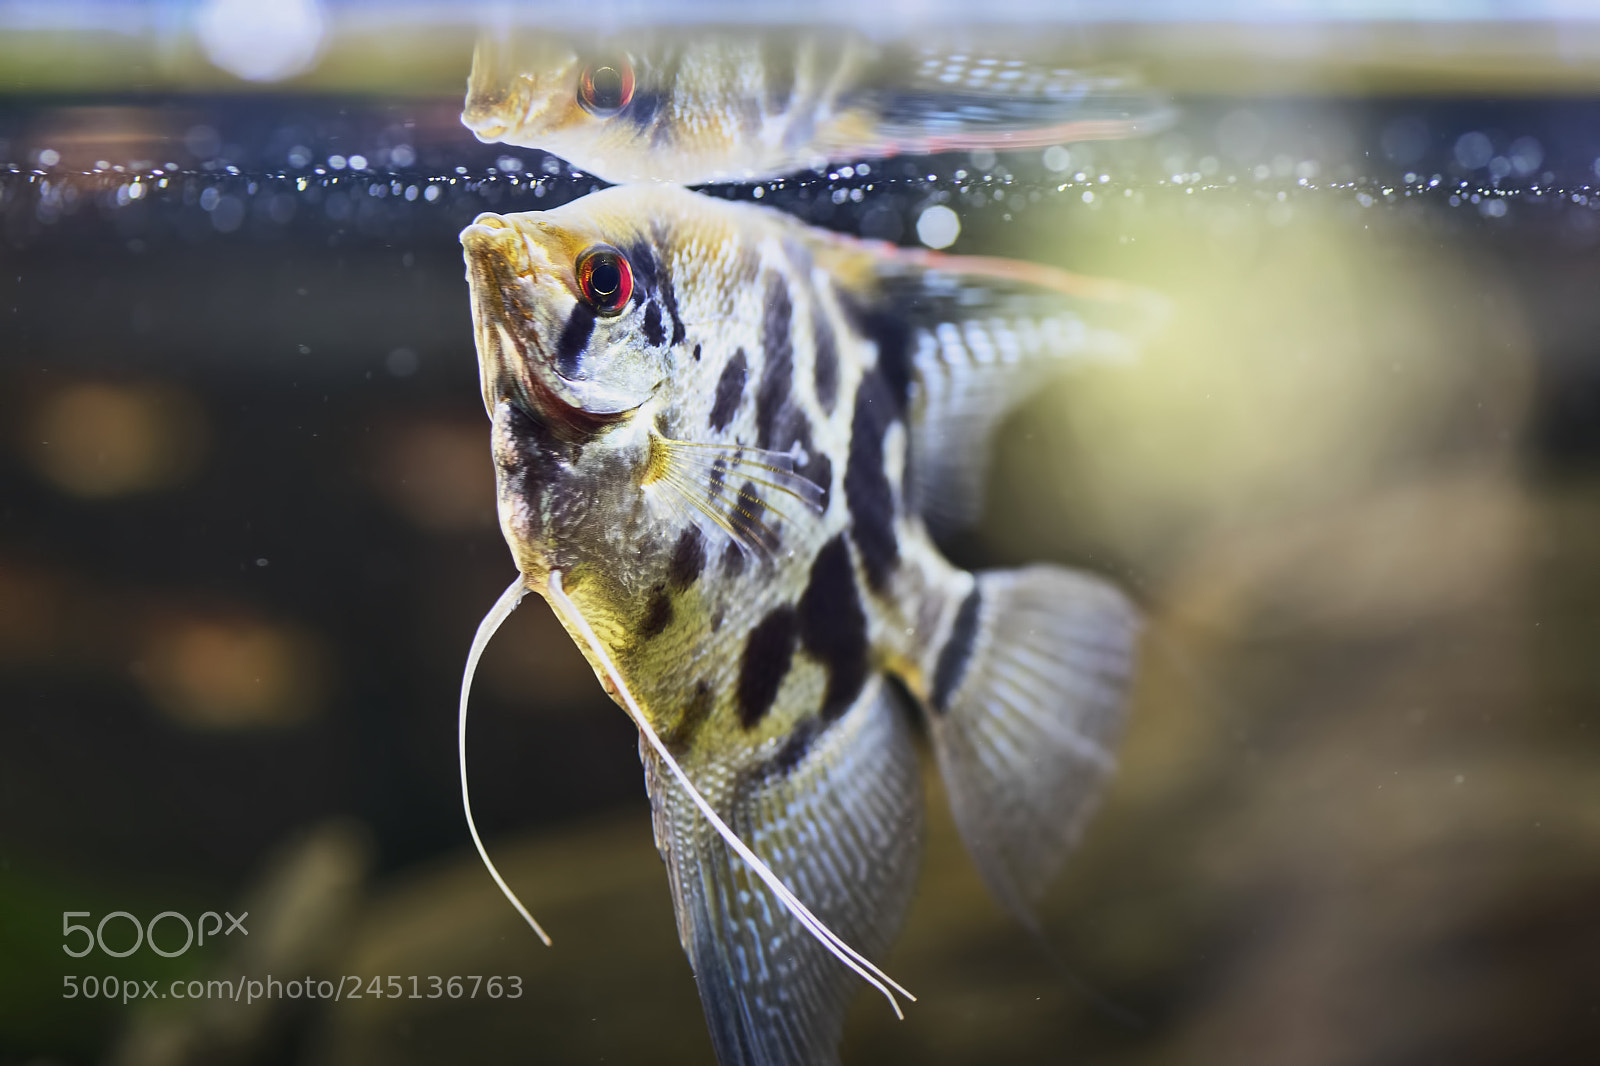 Sony a7 II sample photo. Freshwater angelfish or marbled photography